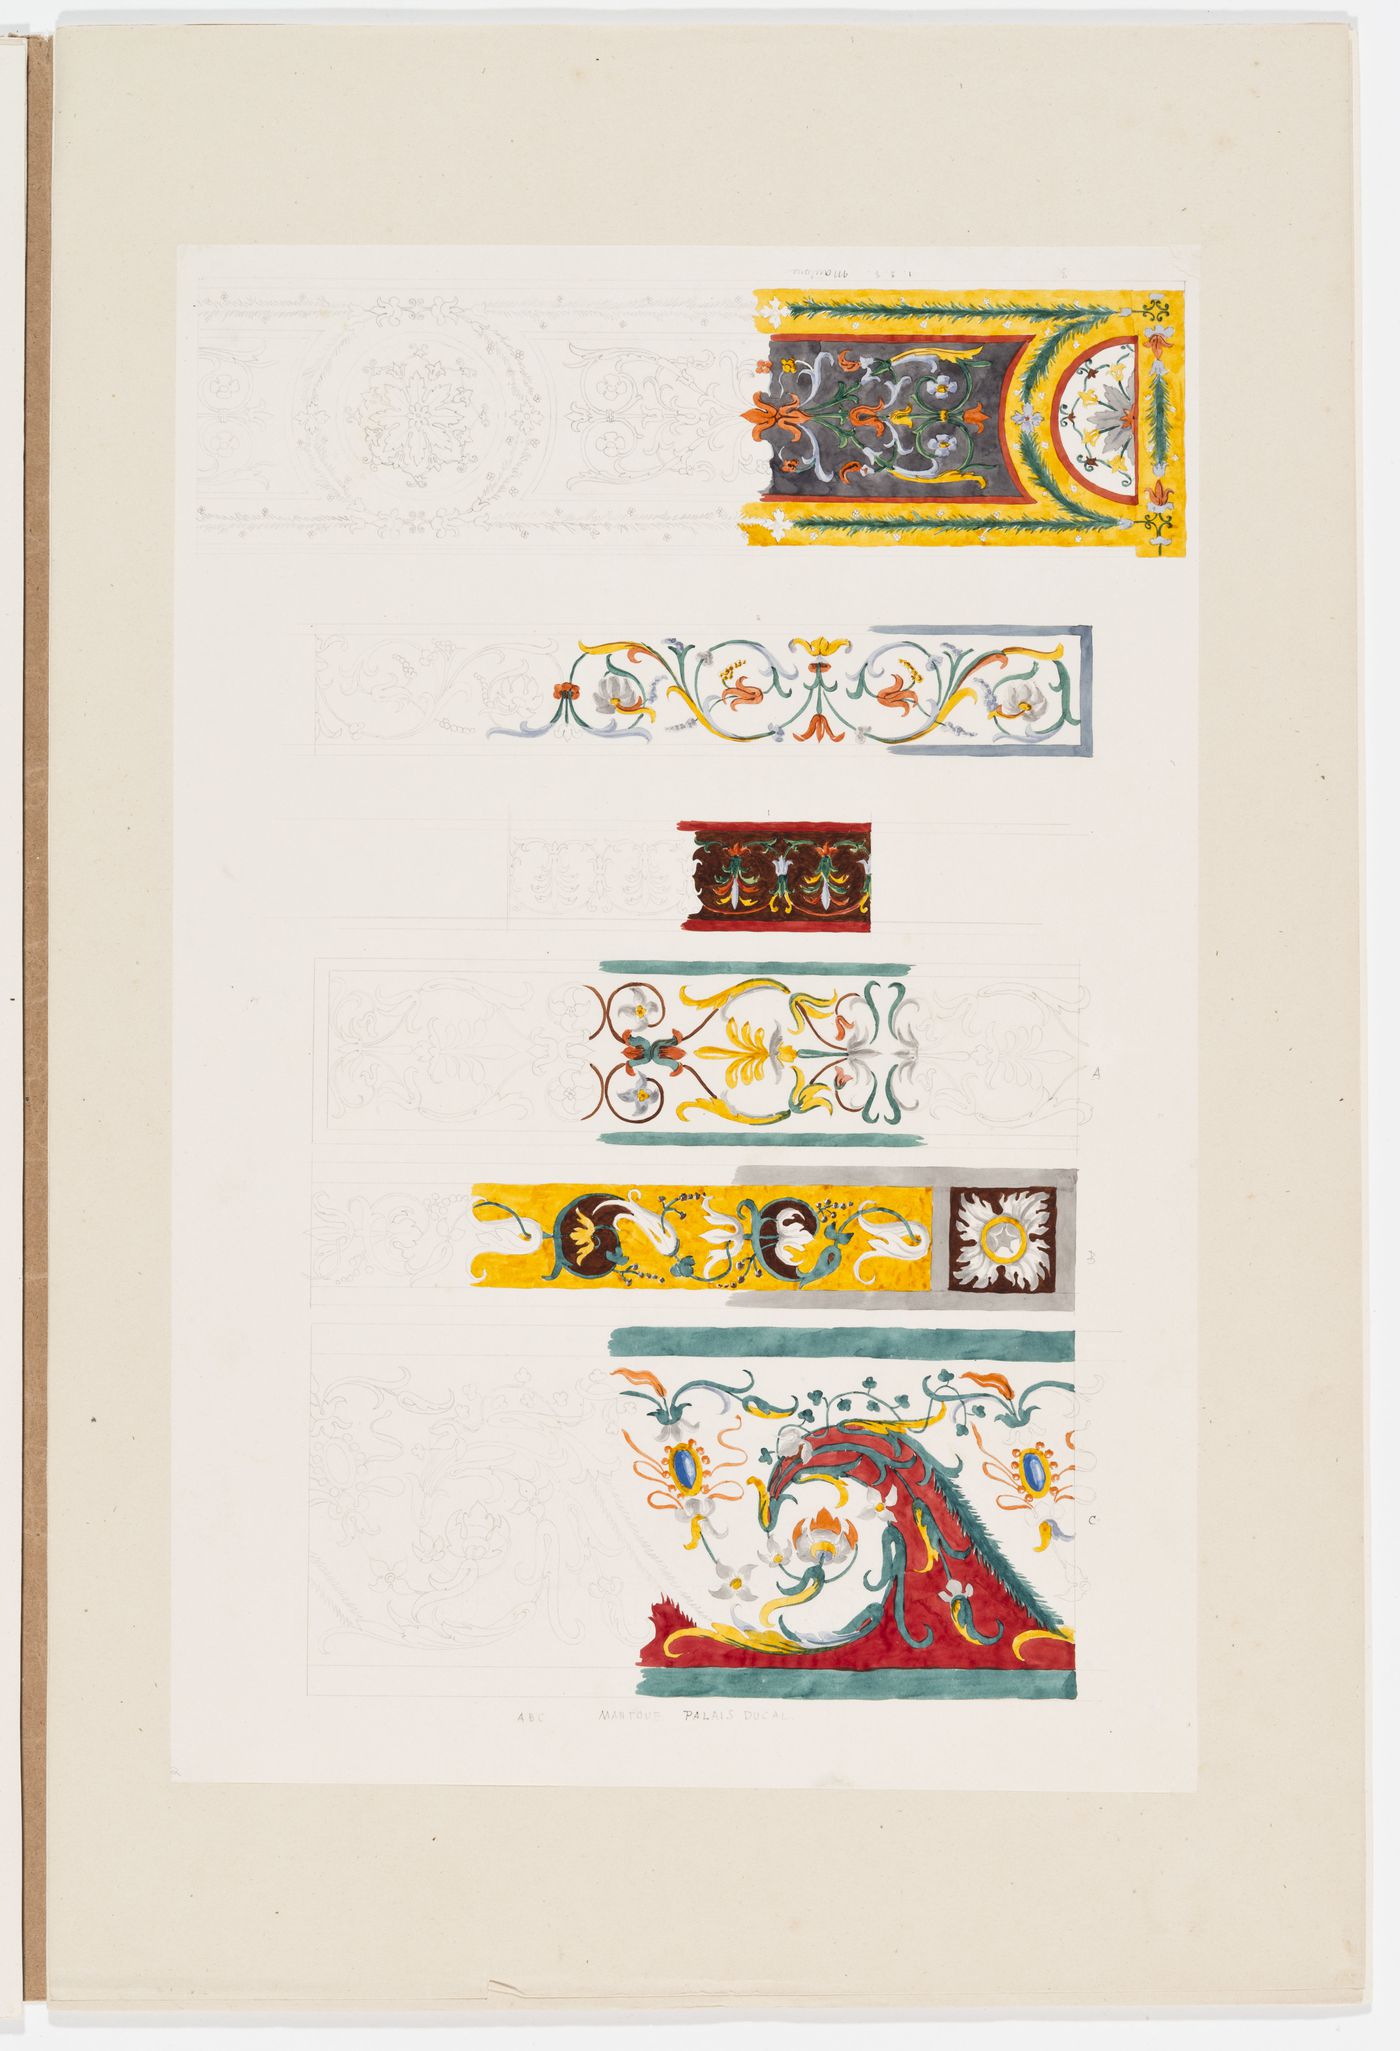 Ornament drawing of six bands decorated with arabesques from the Palazzo ducale, Mantua